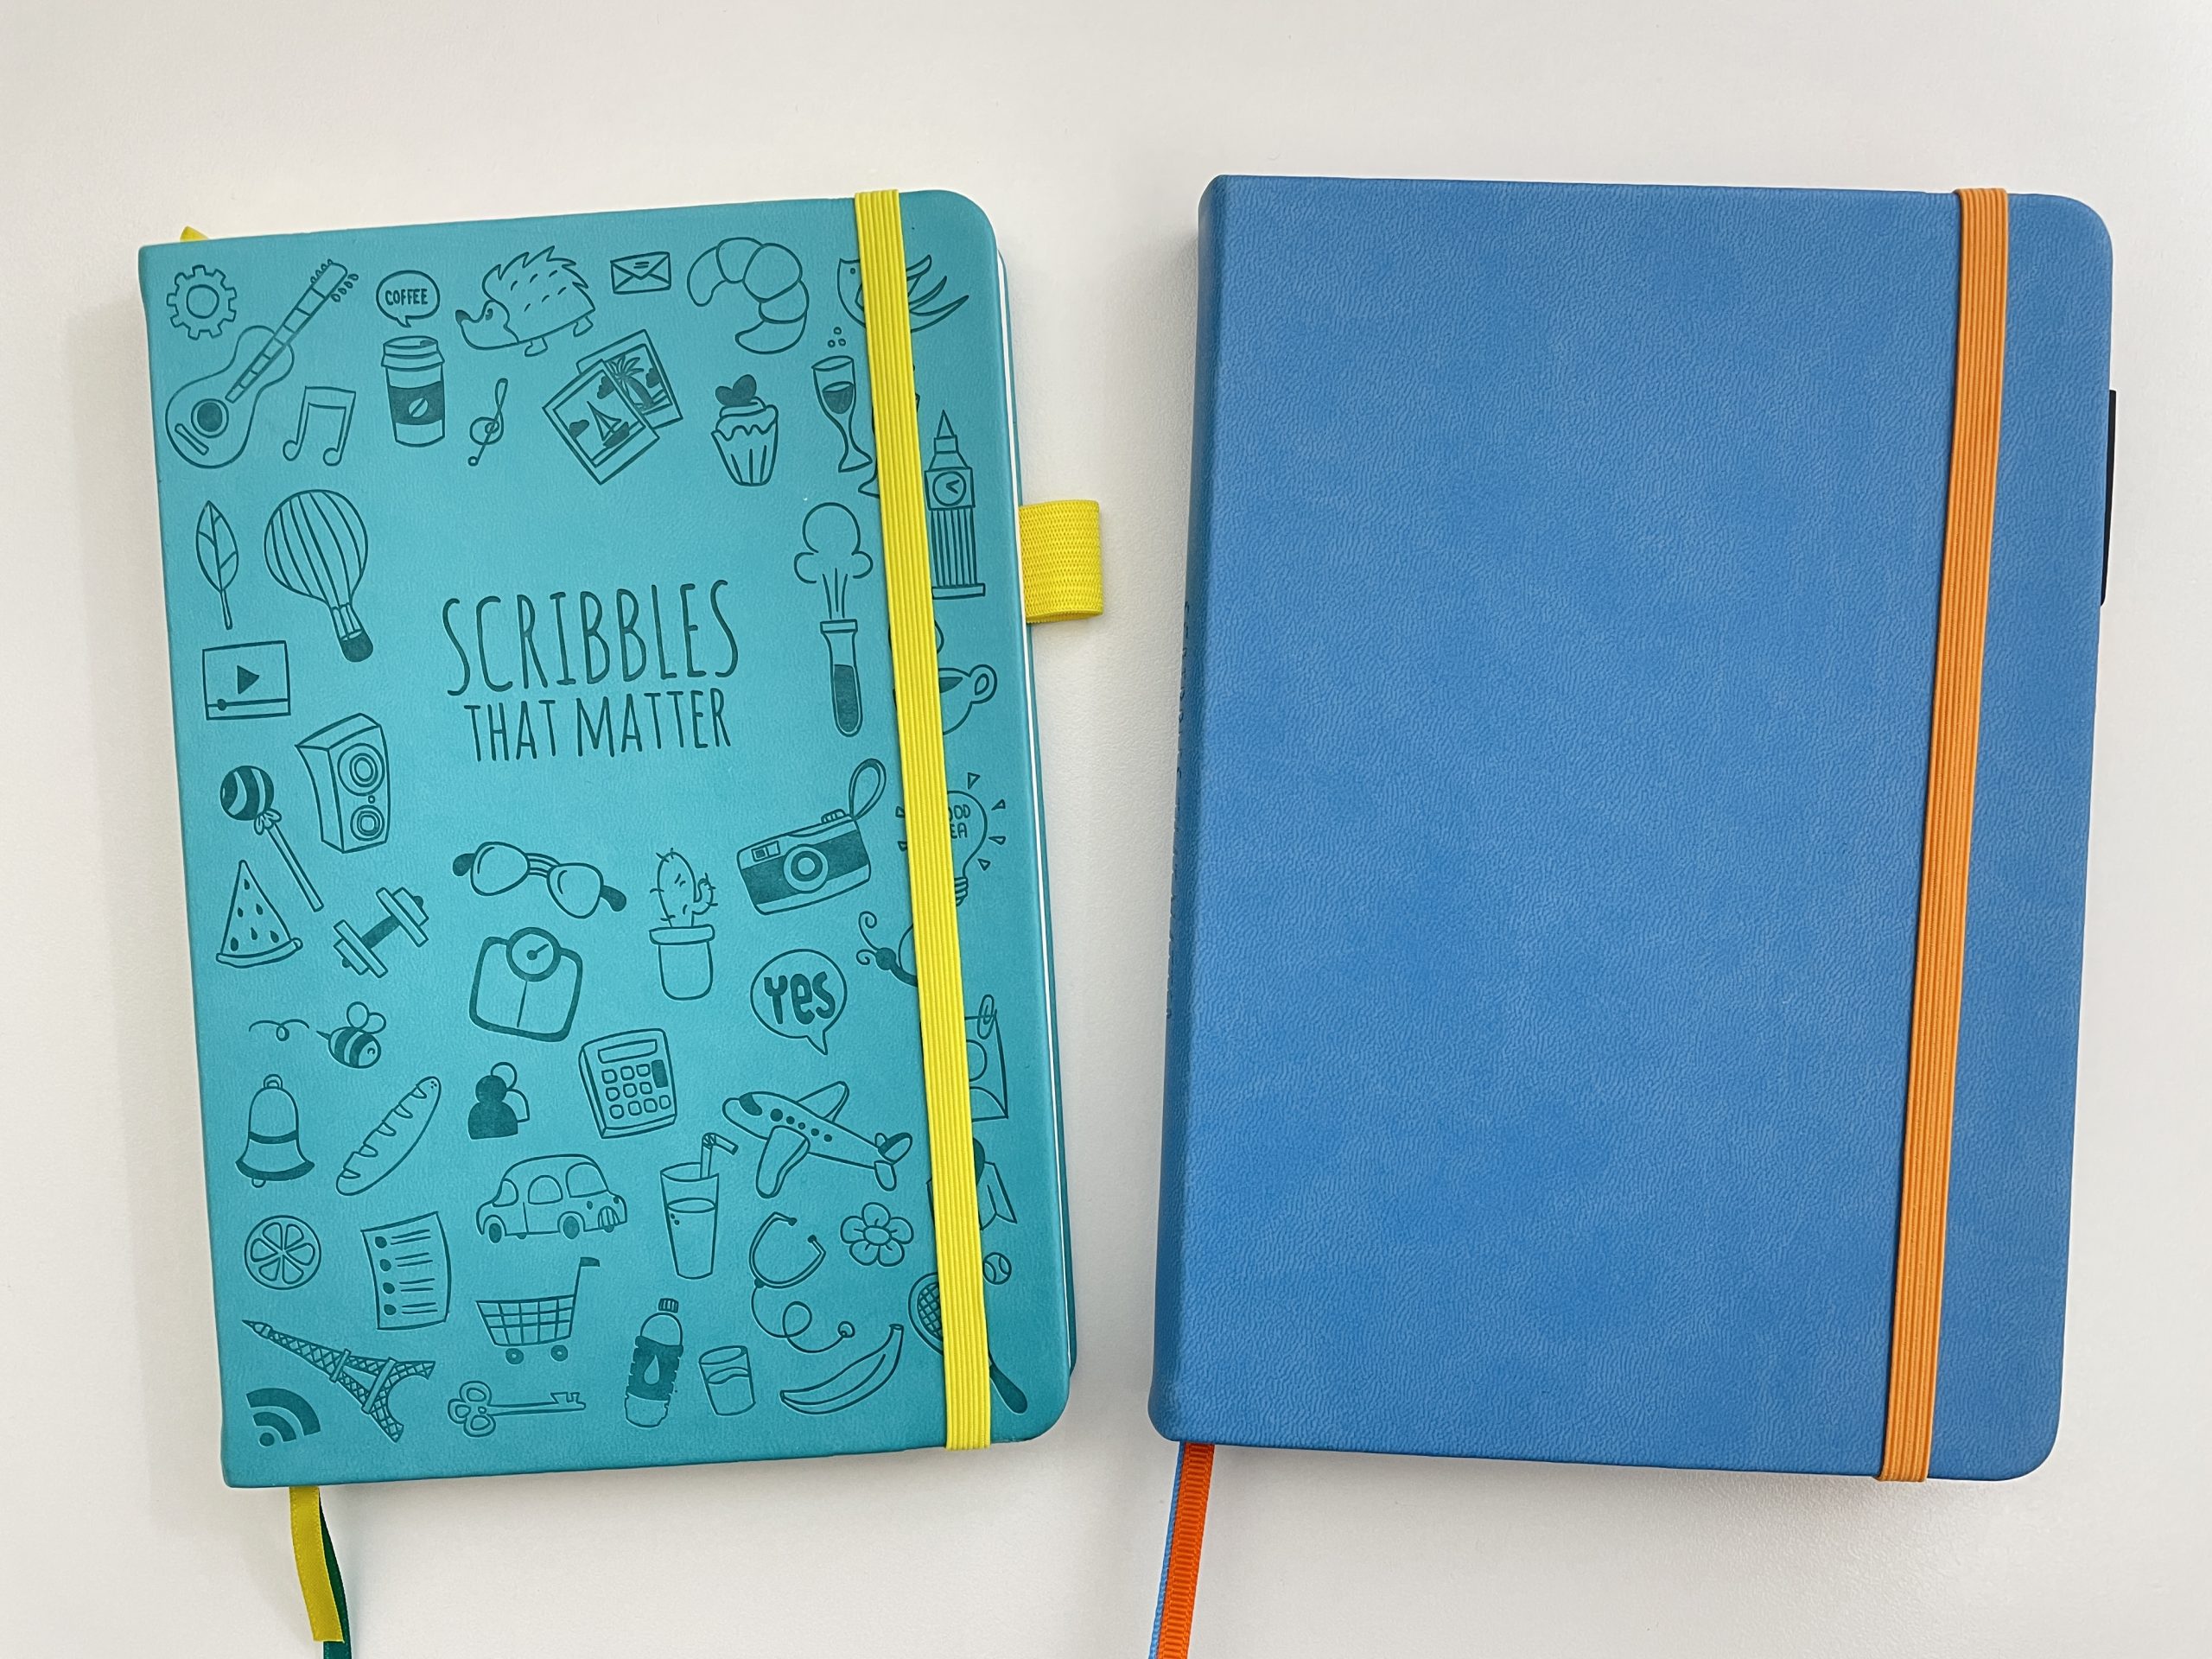 Scribbles That Matter: Iconic versus the Pro Version with 160 GSM paper  (Which is better?)